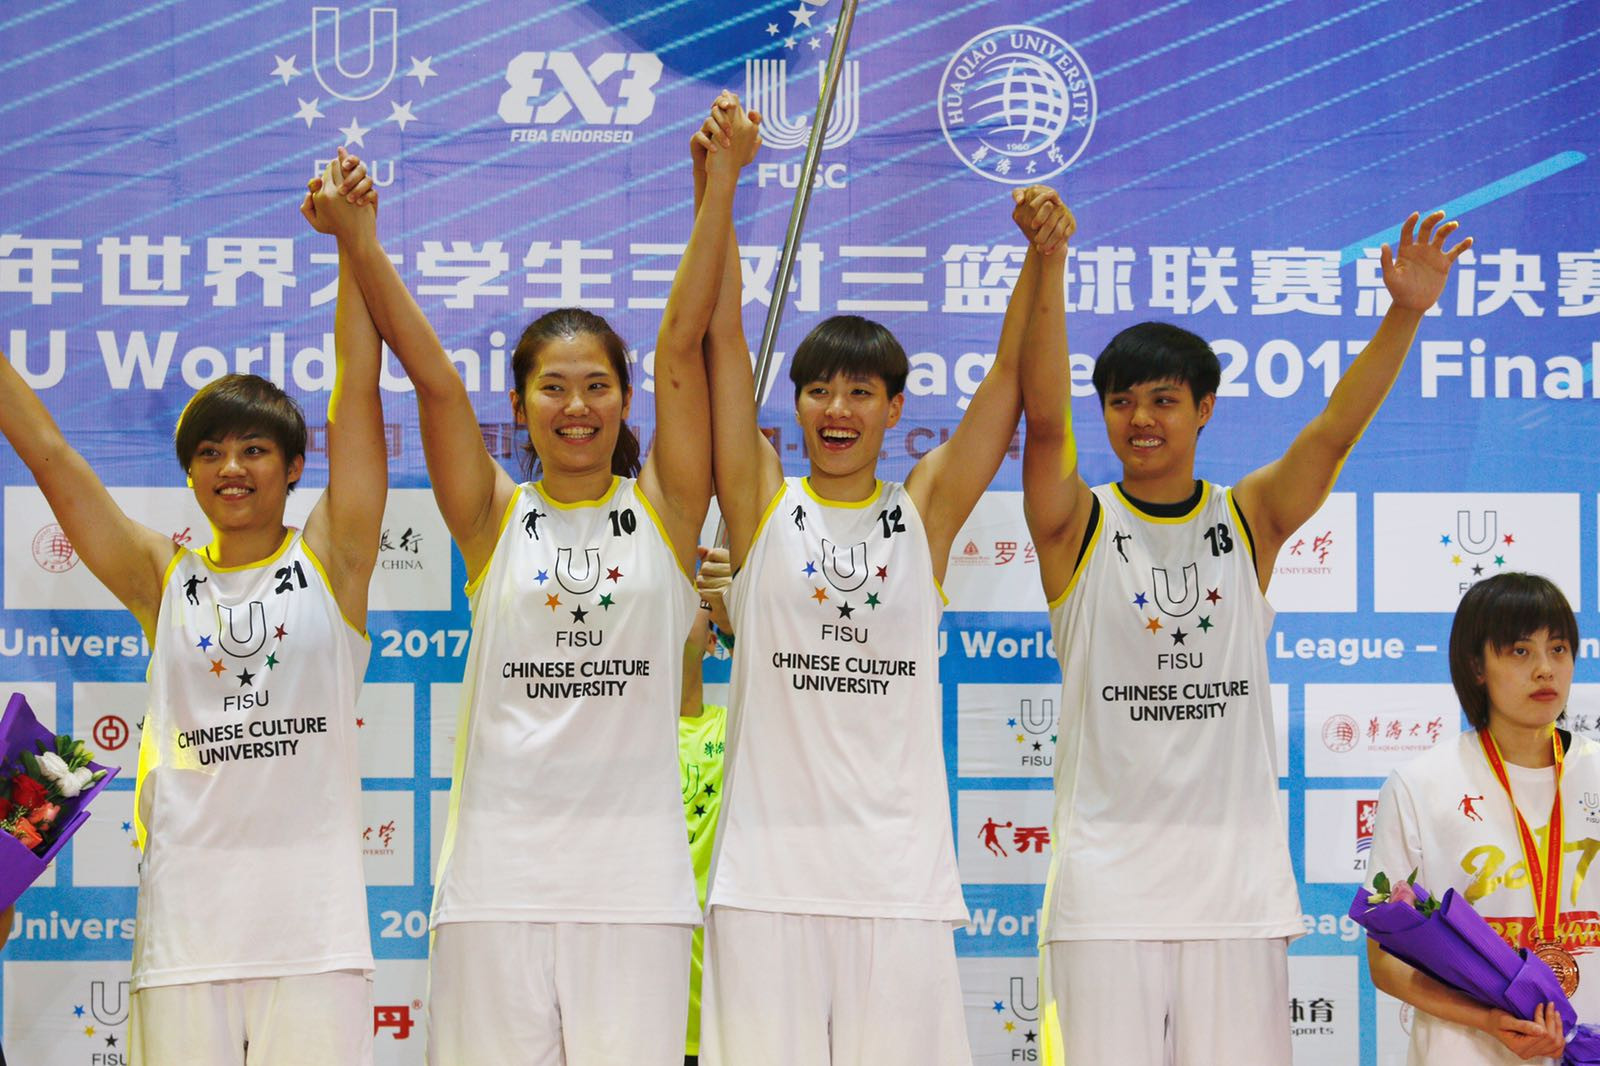 The Chinese Culture University were victorious in the women's event ©FISU